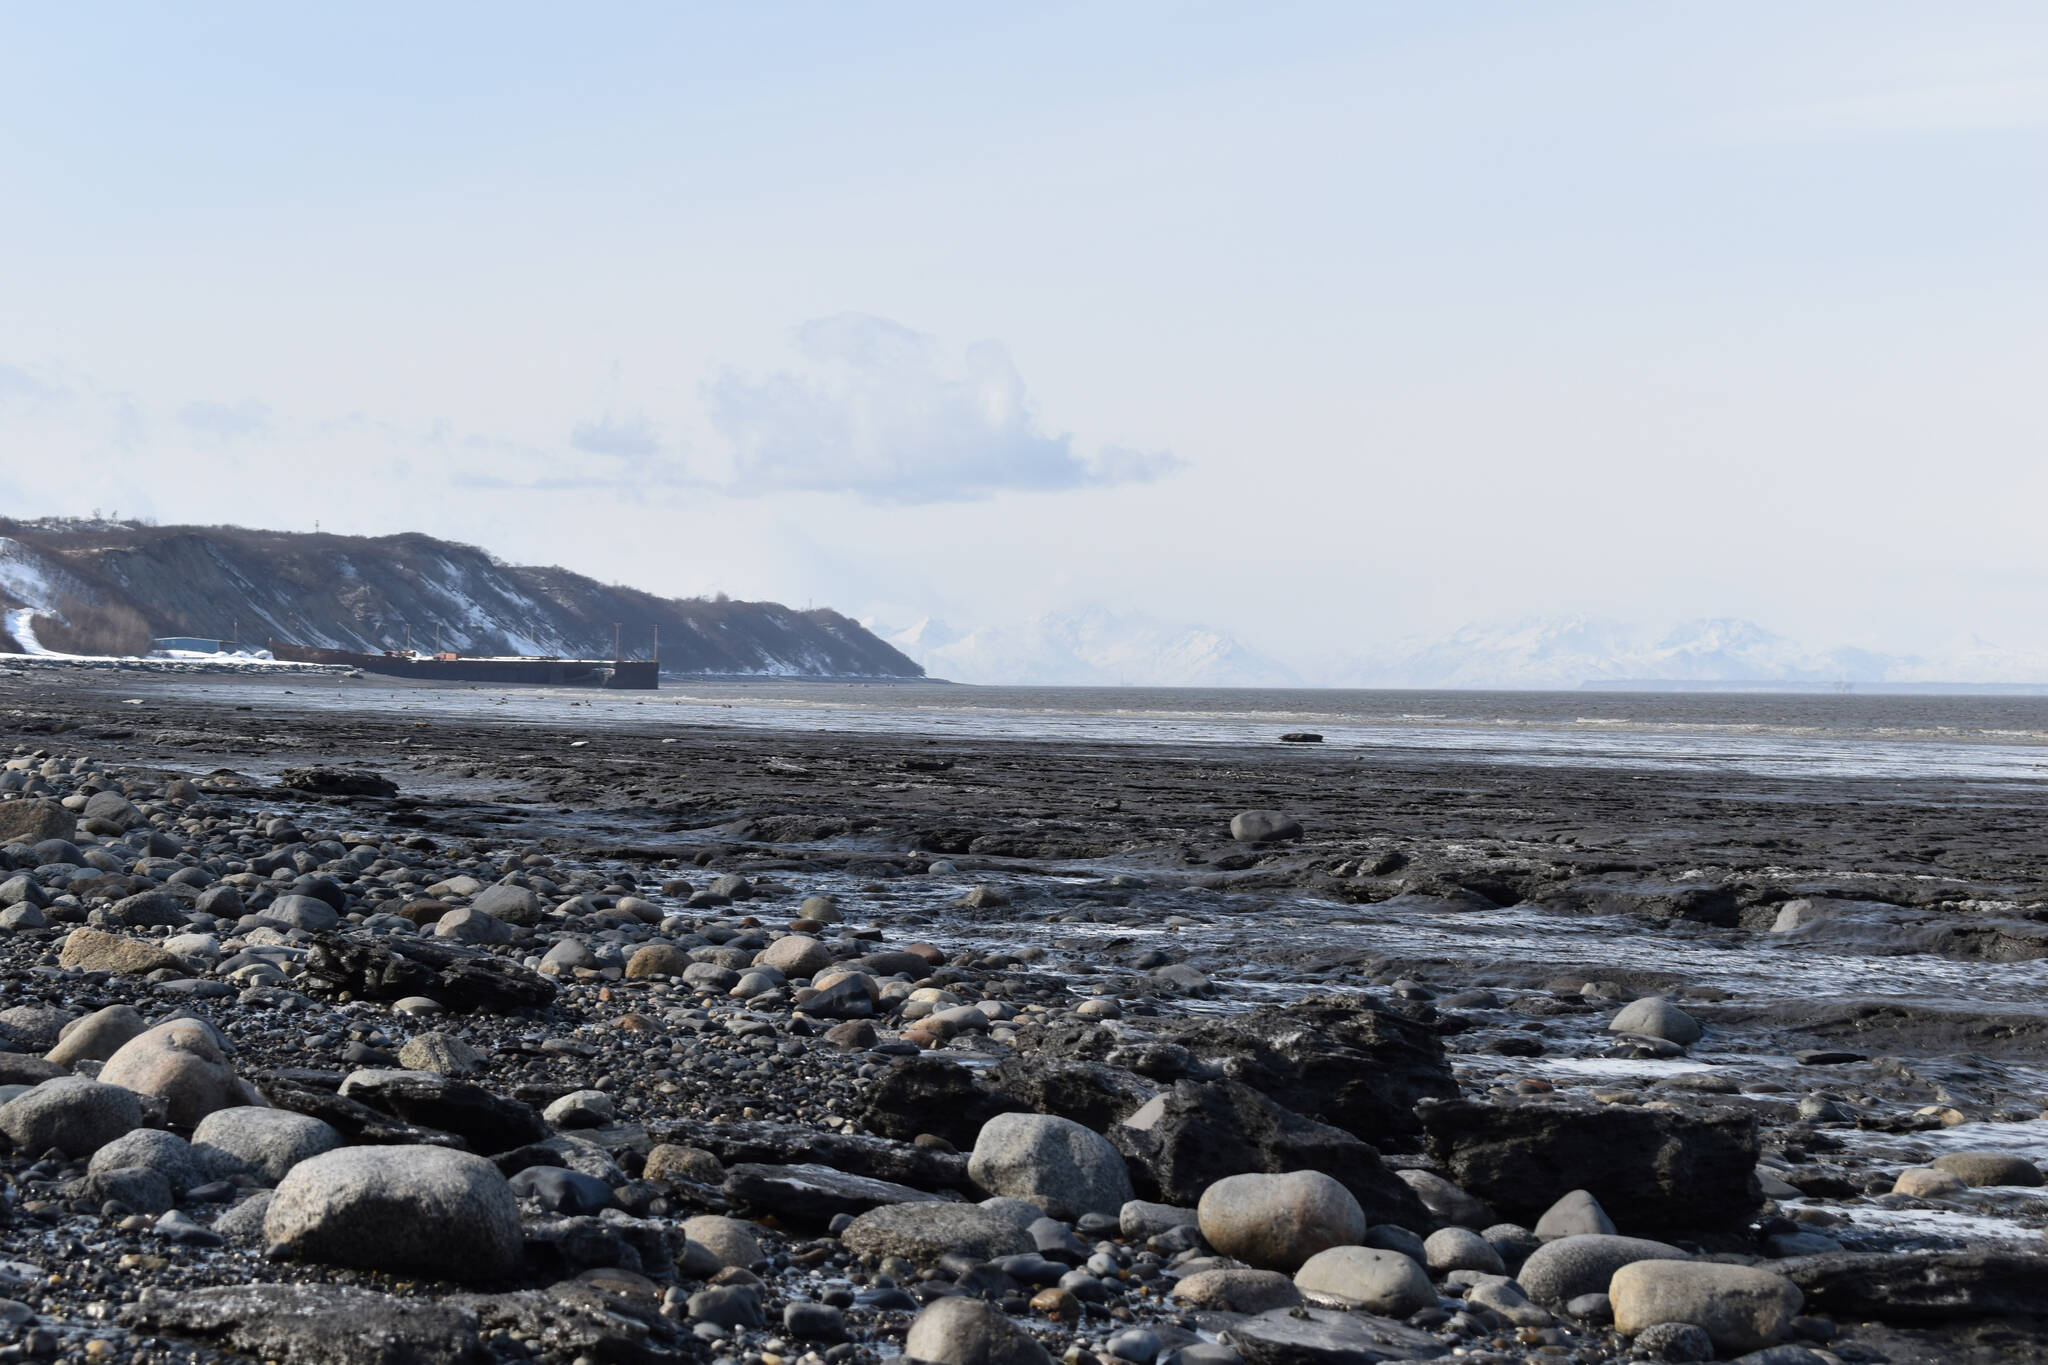 The waters of Cook Inlet lap against Nikishka Beach in Nikiski, Alaska, where several local fish sites are located, on Friday, March 24, 2023. (Jake Dye/Peninsula Clarion)